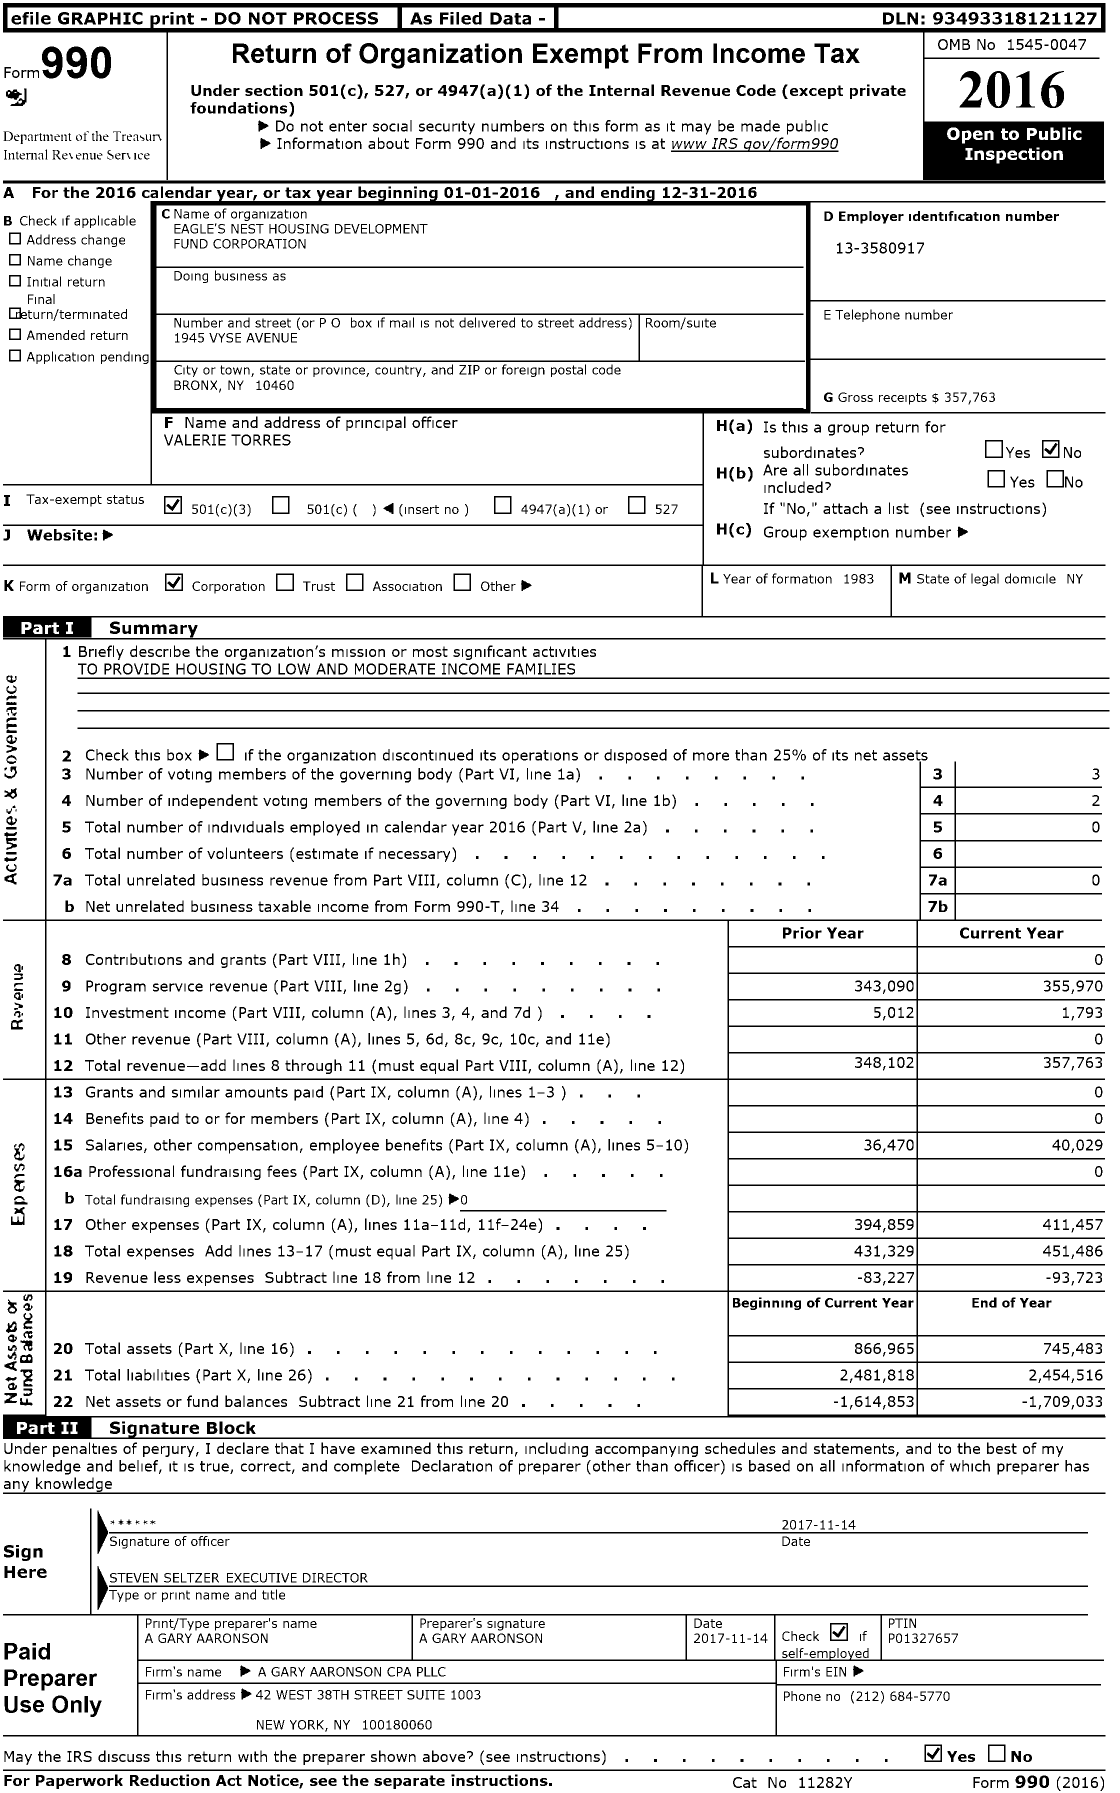 Image of first page of 2016 Form 990 for Eagle's Nest Housing Development Fund Corporation